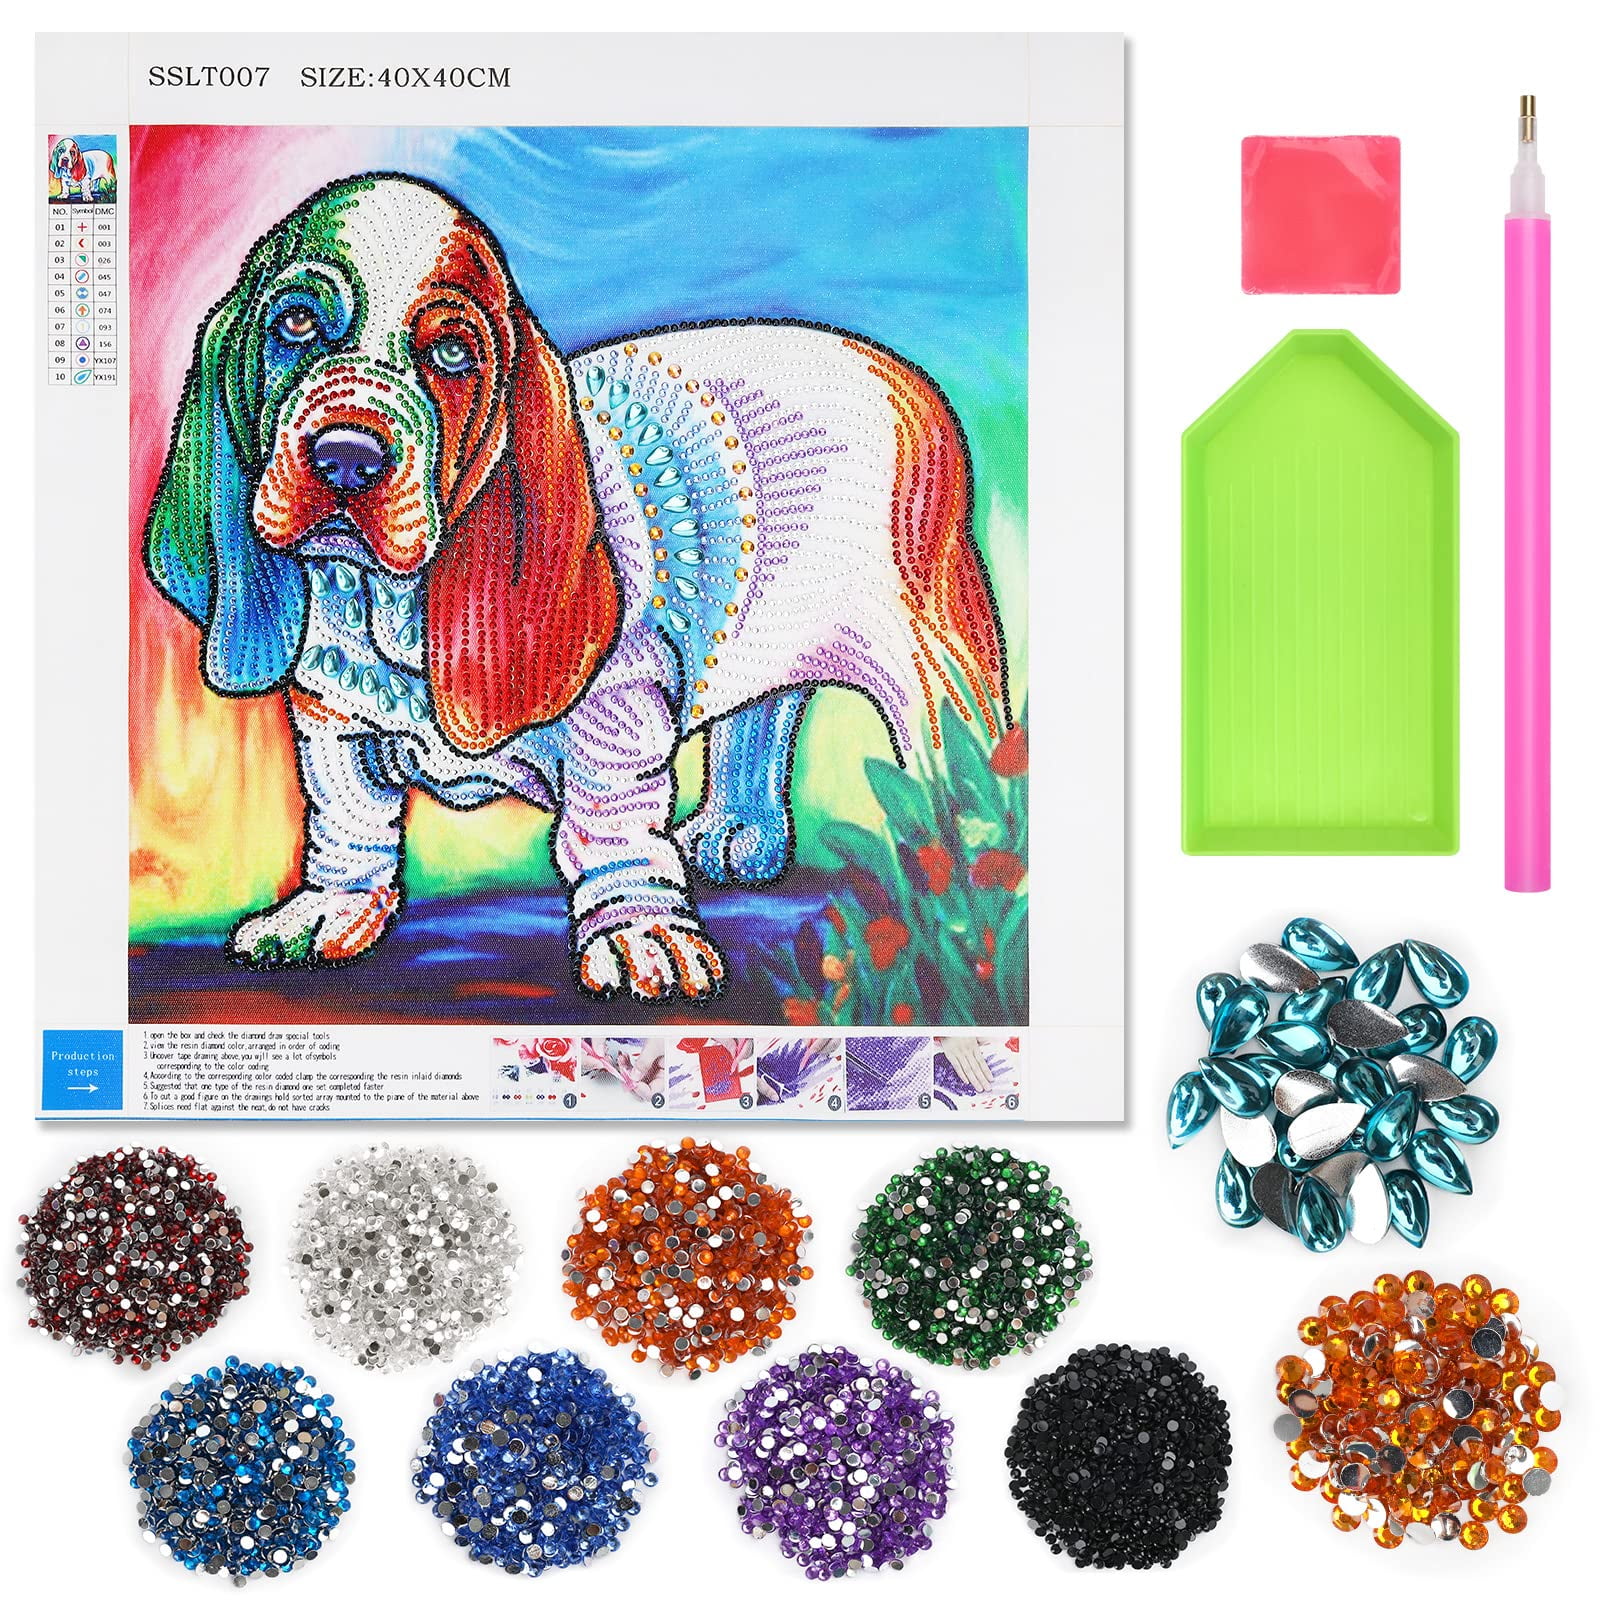 Estune 16 Pieces Kids Diamond Painting Kits Diamond Painting Kits for Kids  Diamond Painting 5D DIY Animals DIY Painting by Number Kits for Beginners